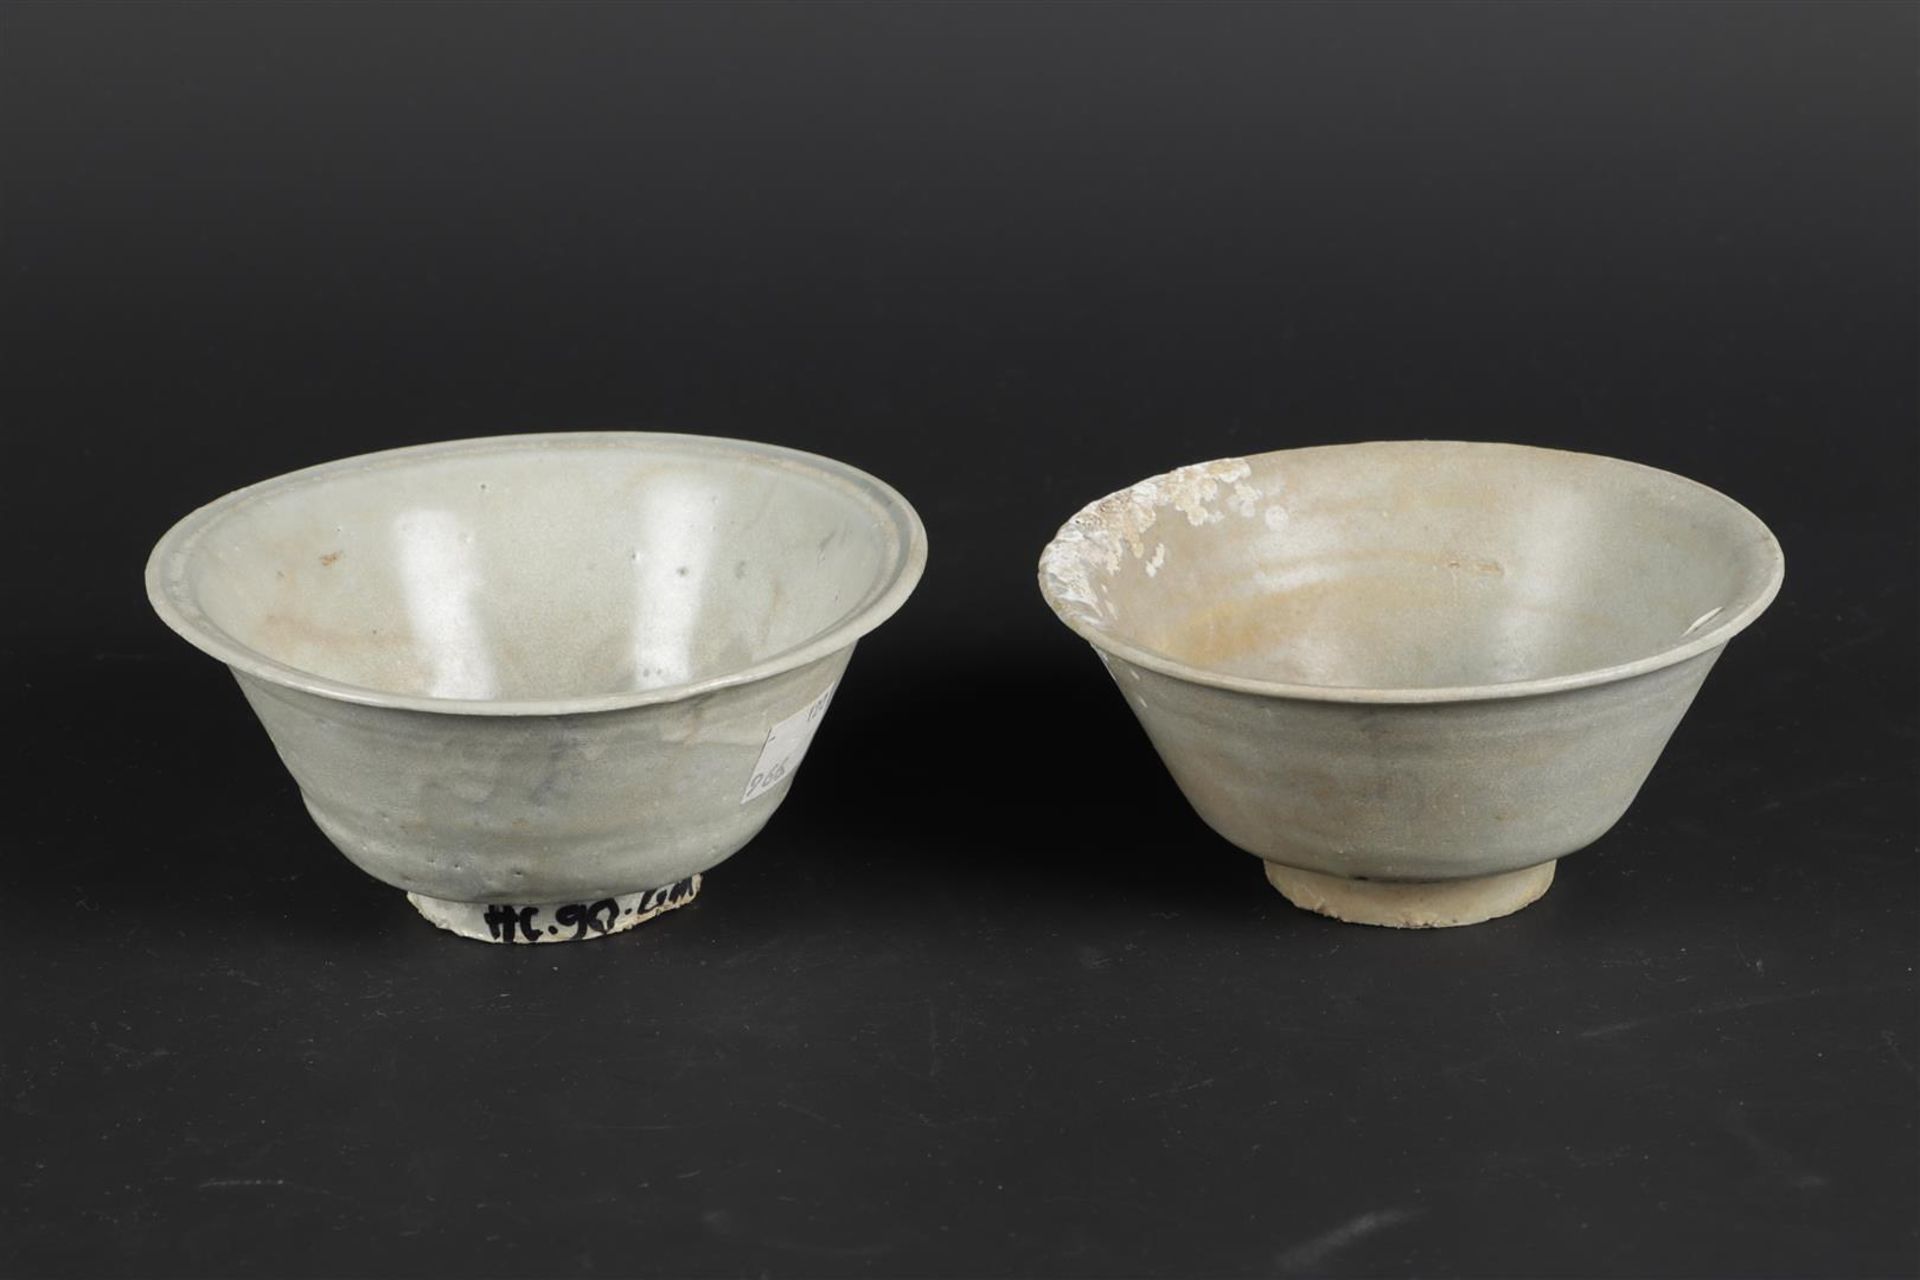 Two stoneware rice bowls, origin Vung Tau Cargo (sea finds auctioned at Christies, 1992). China, Kan